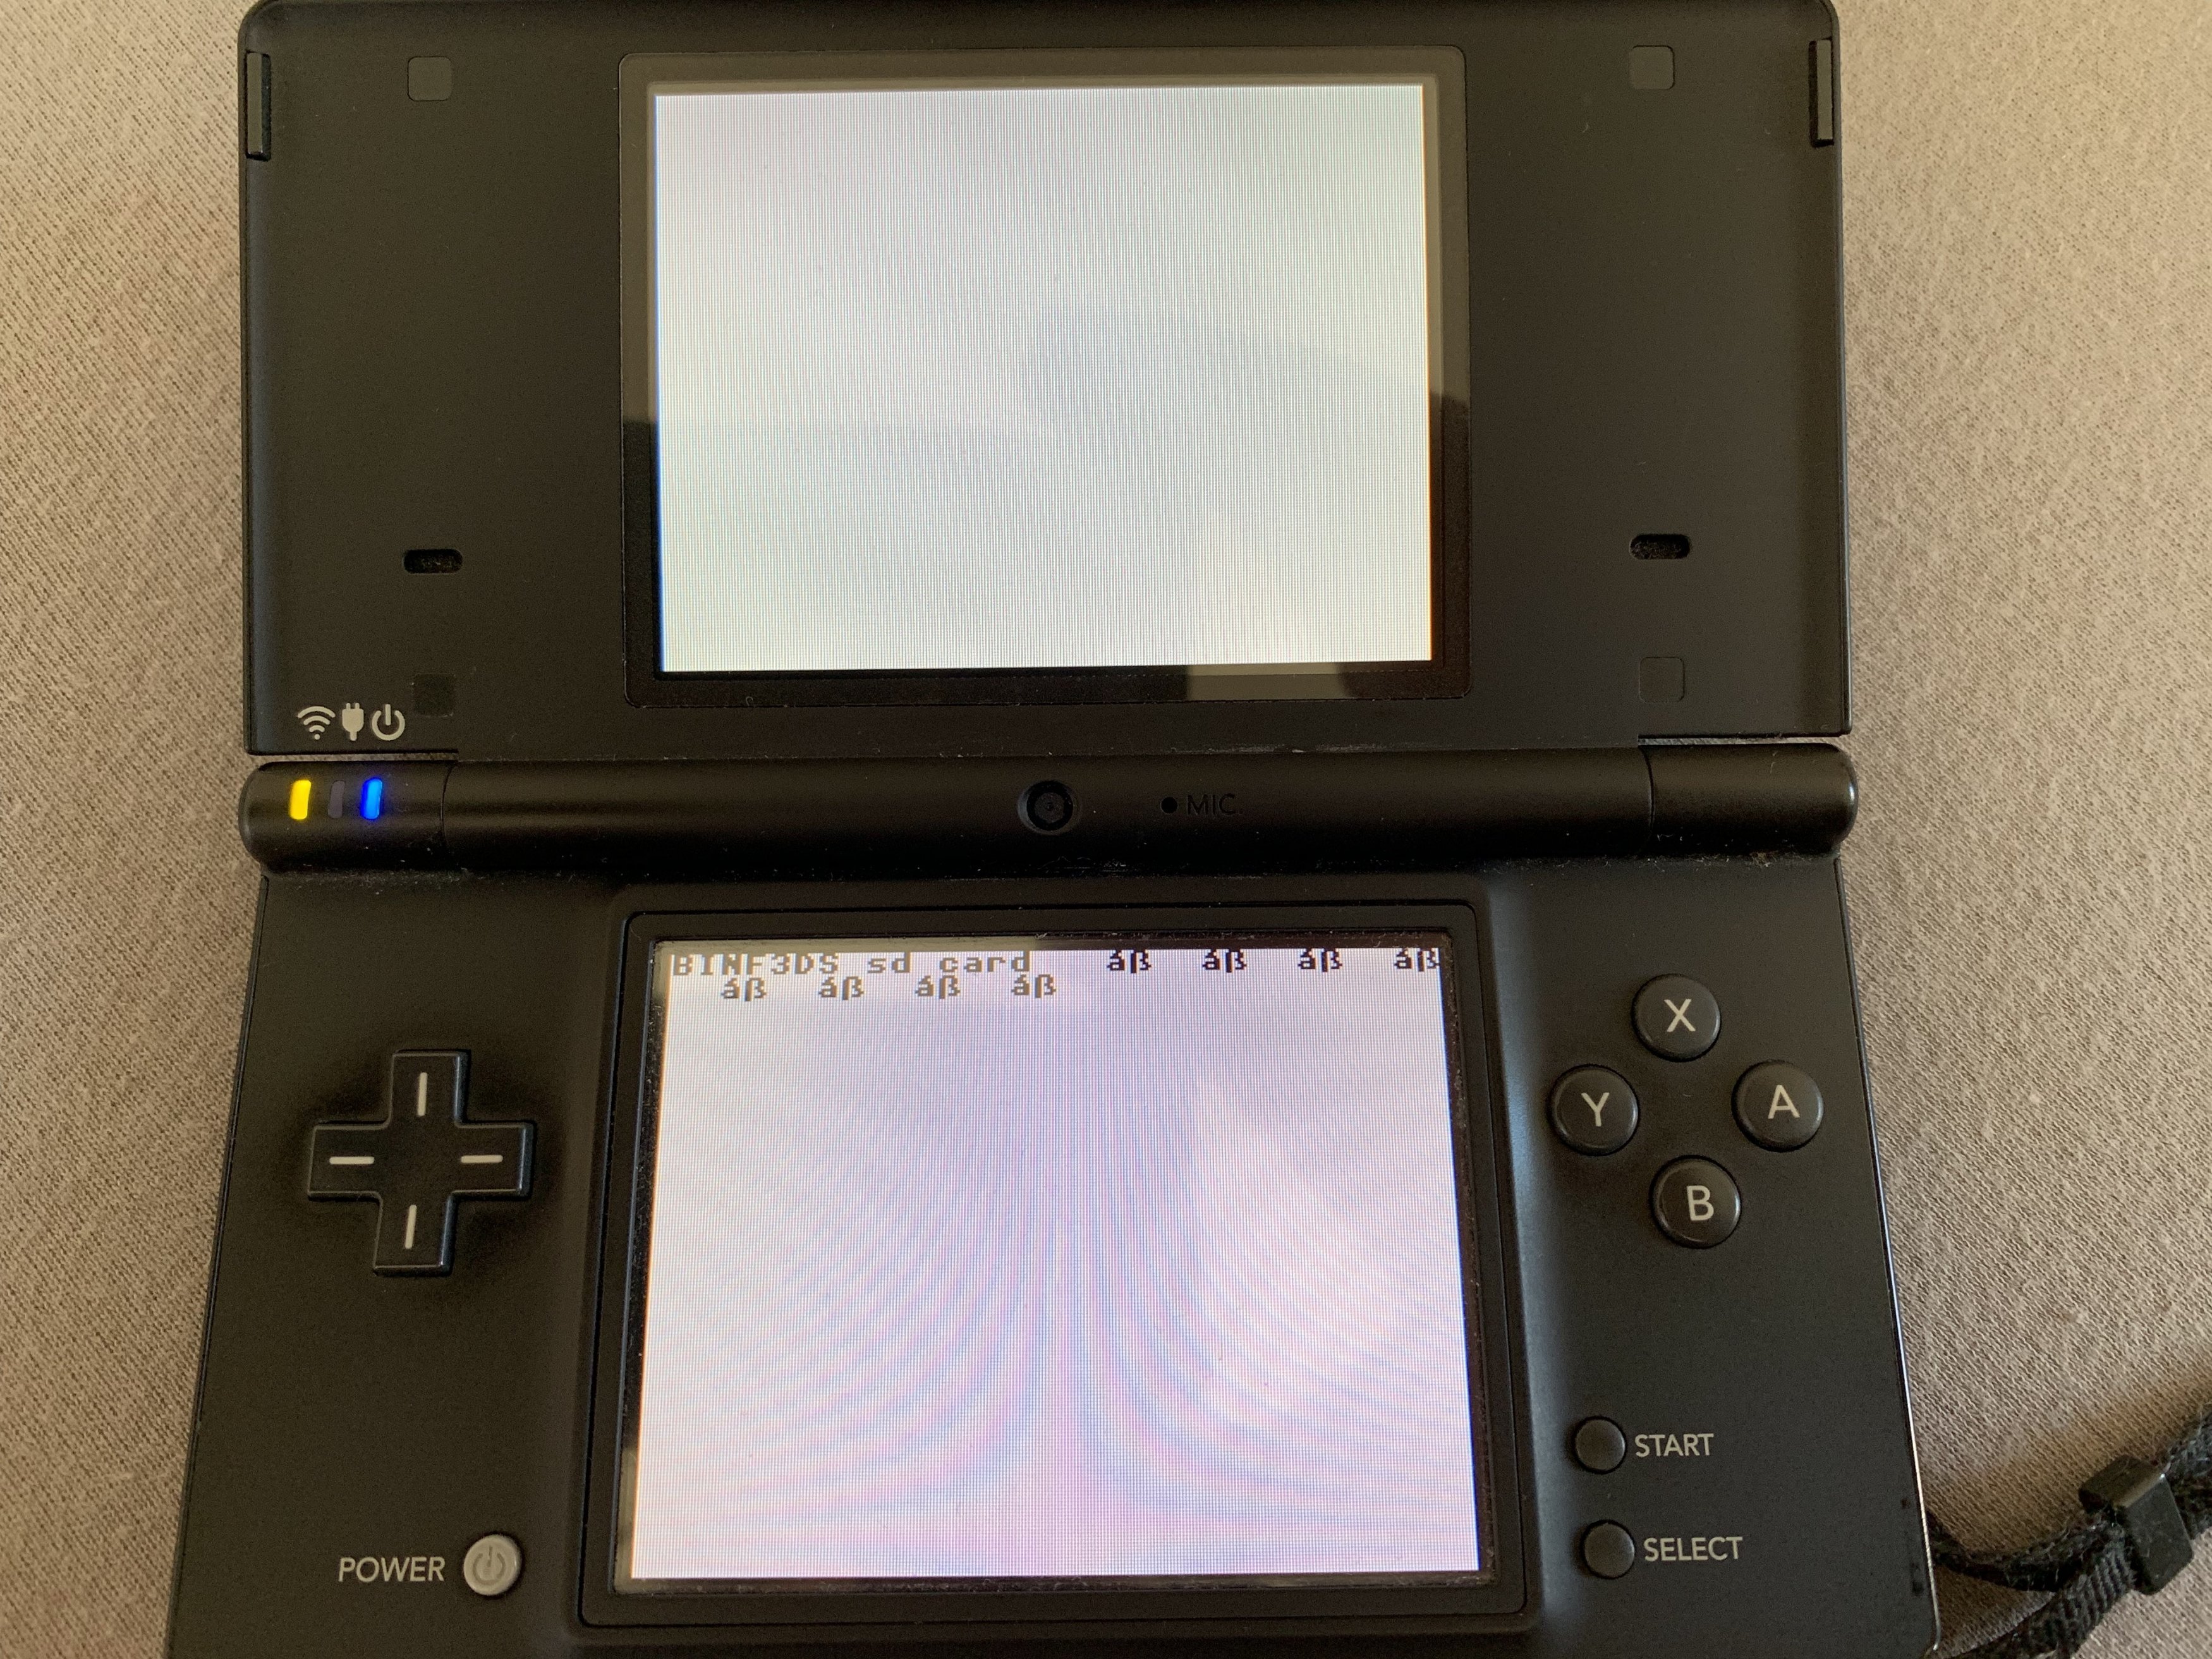 GBA Roms on Hacked DSi | GBAtemp.net - The Independent Video Game Community